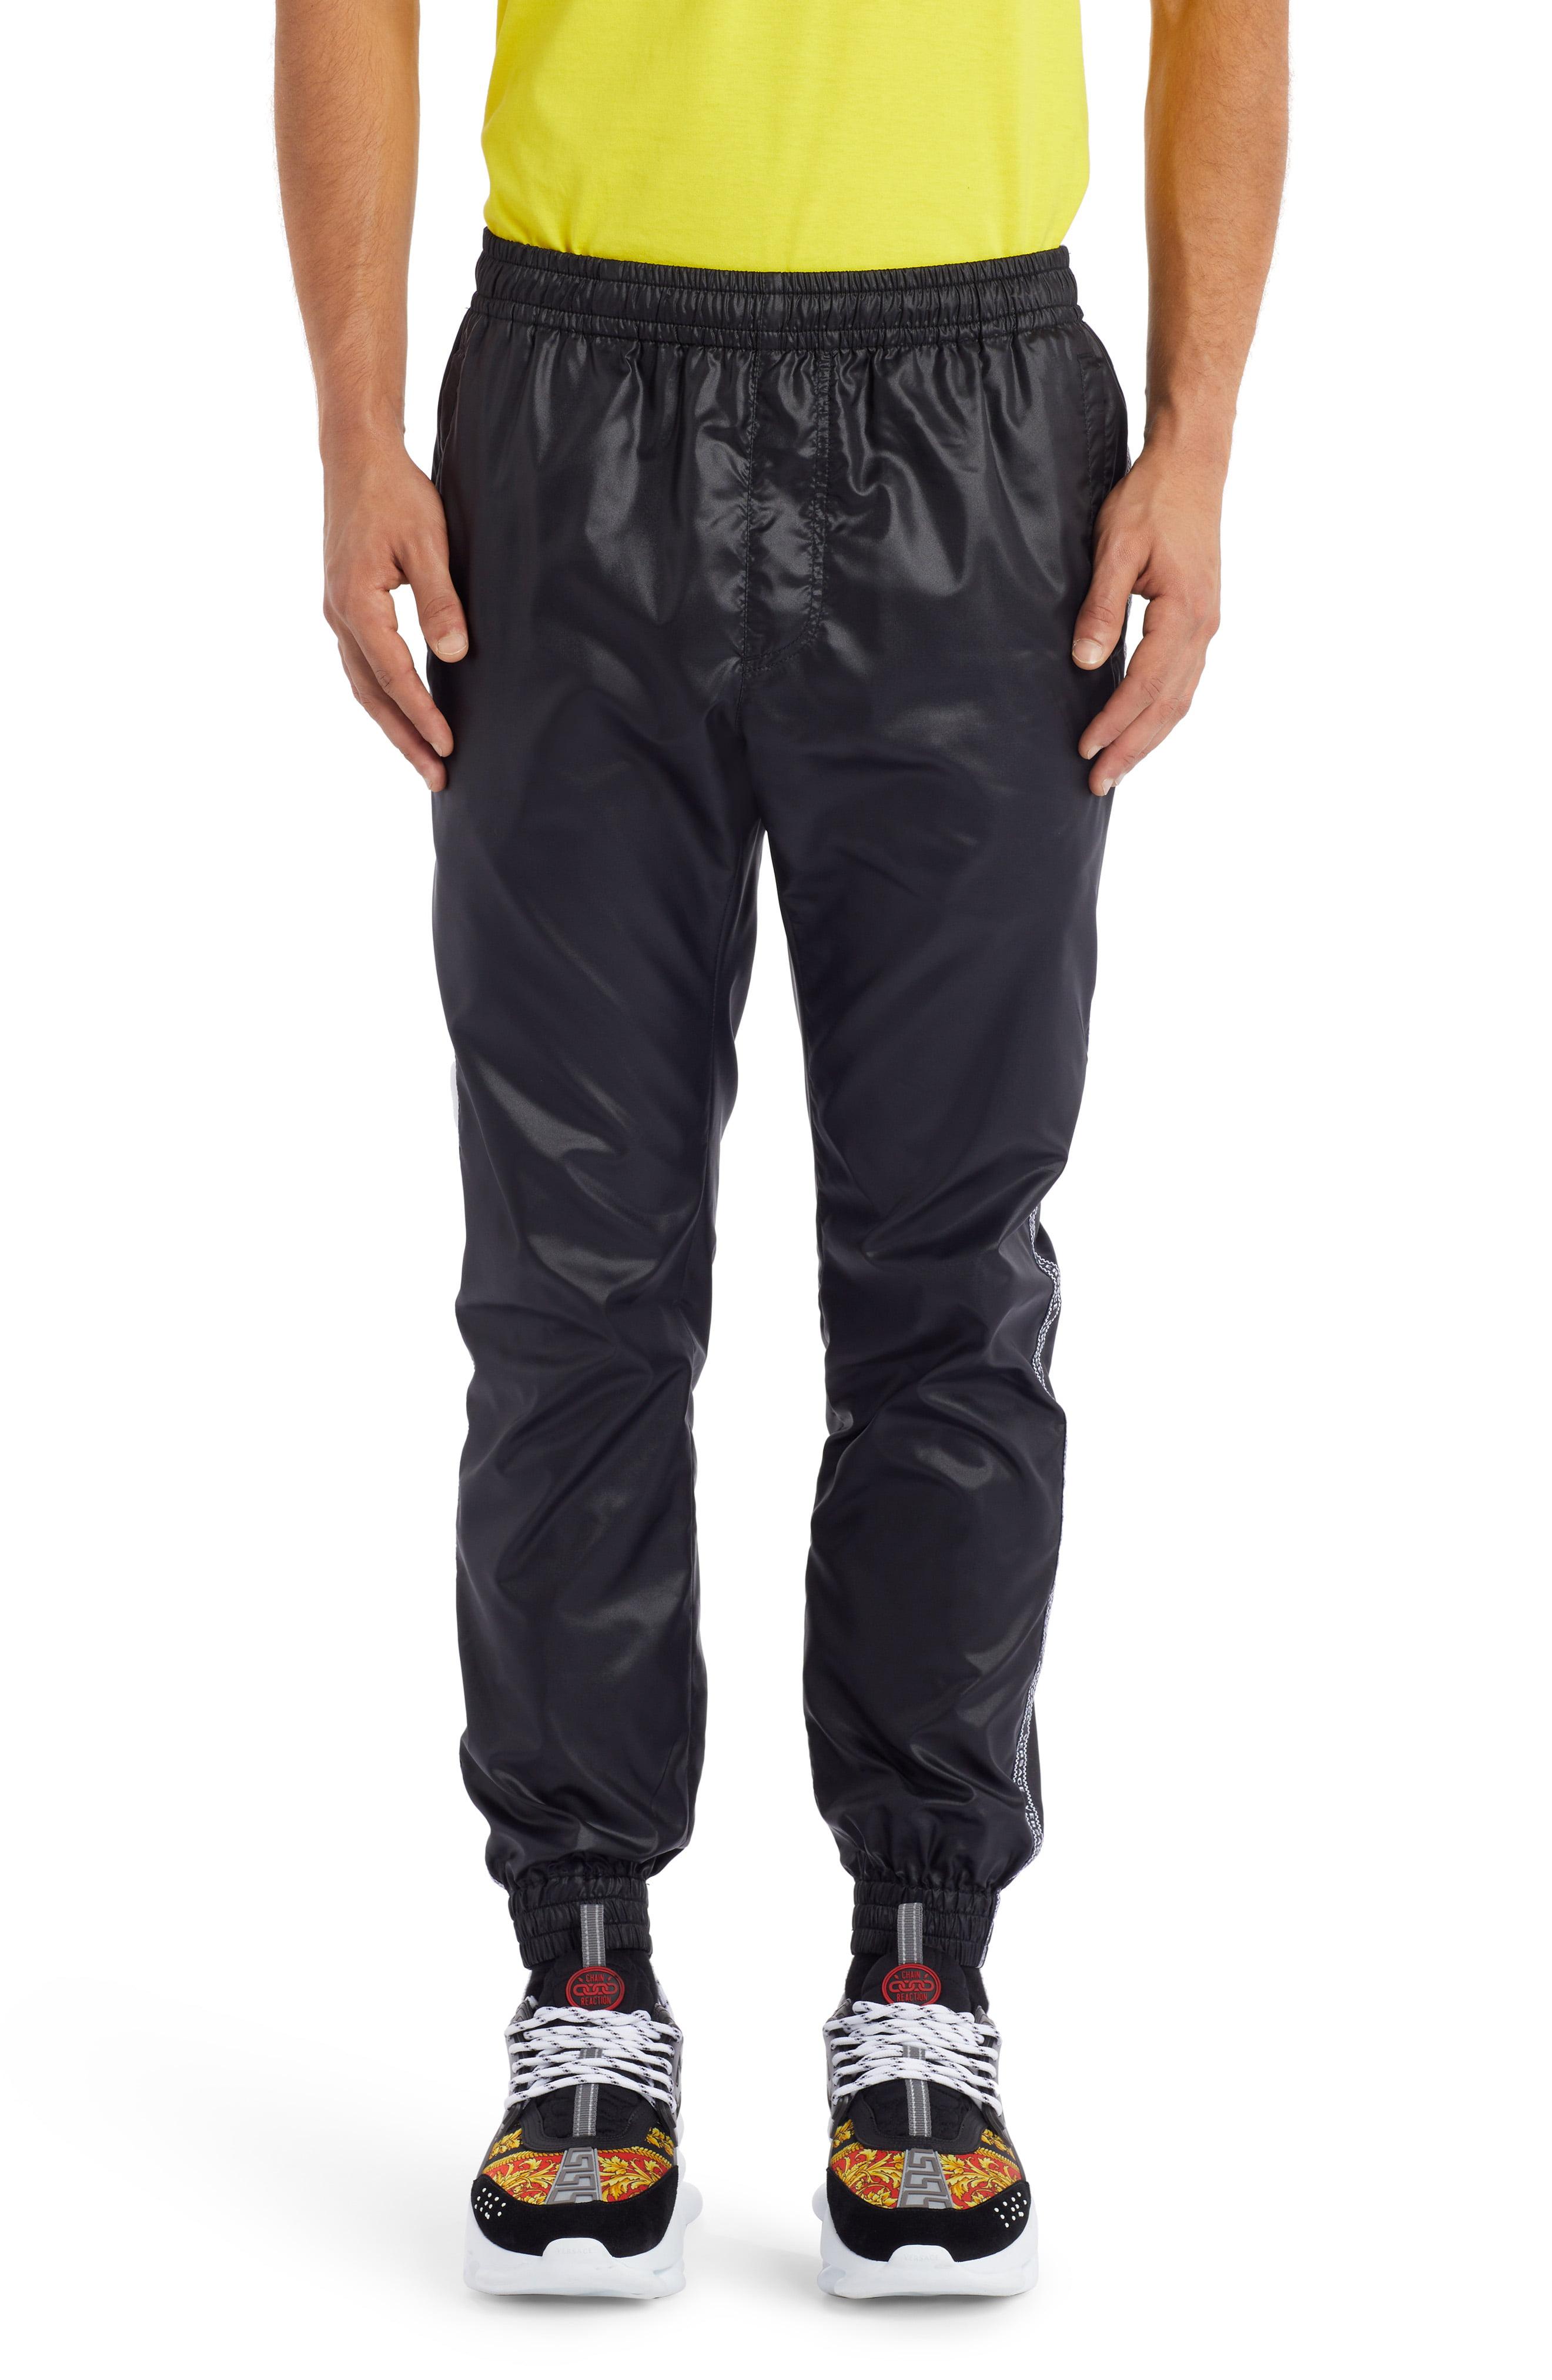 Versace Synthetic Nylon Track Pants in Black for Men - Lyst